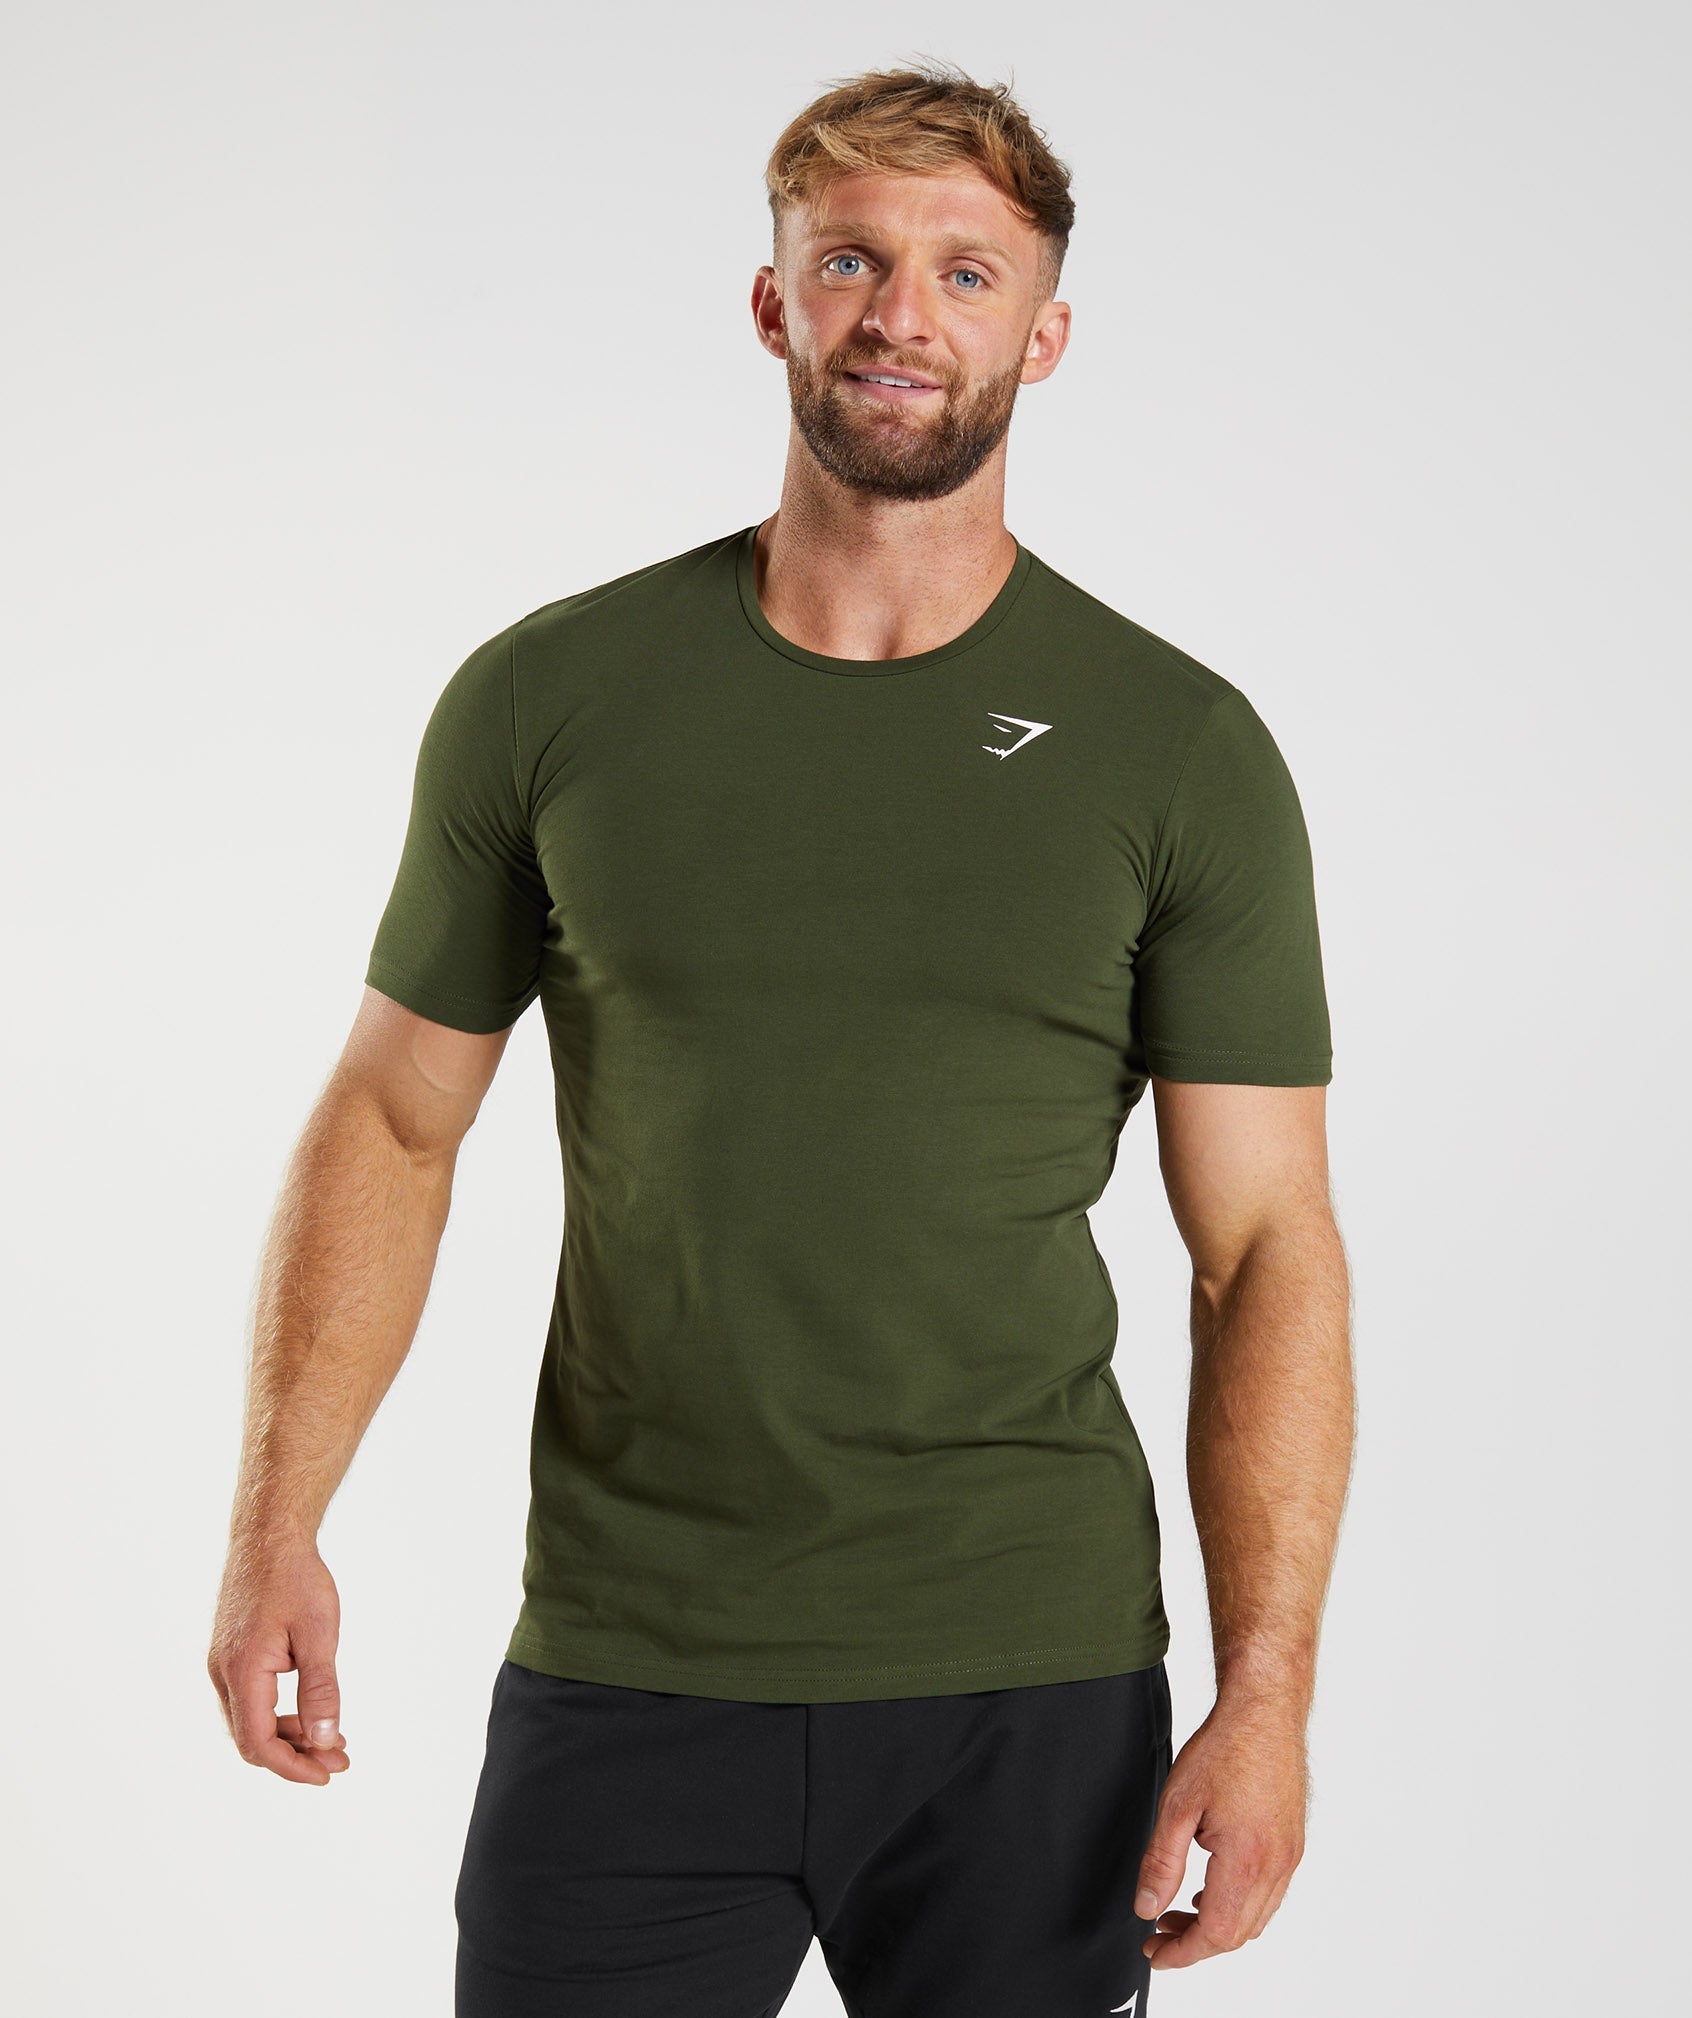 Essential T-Shirt in Moss Olive - view 1